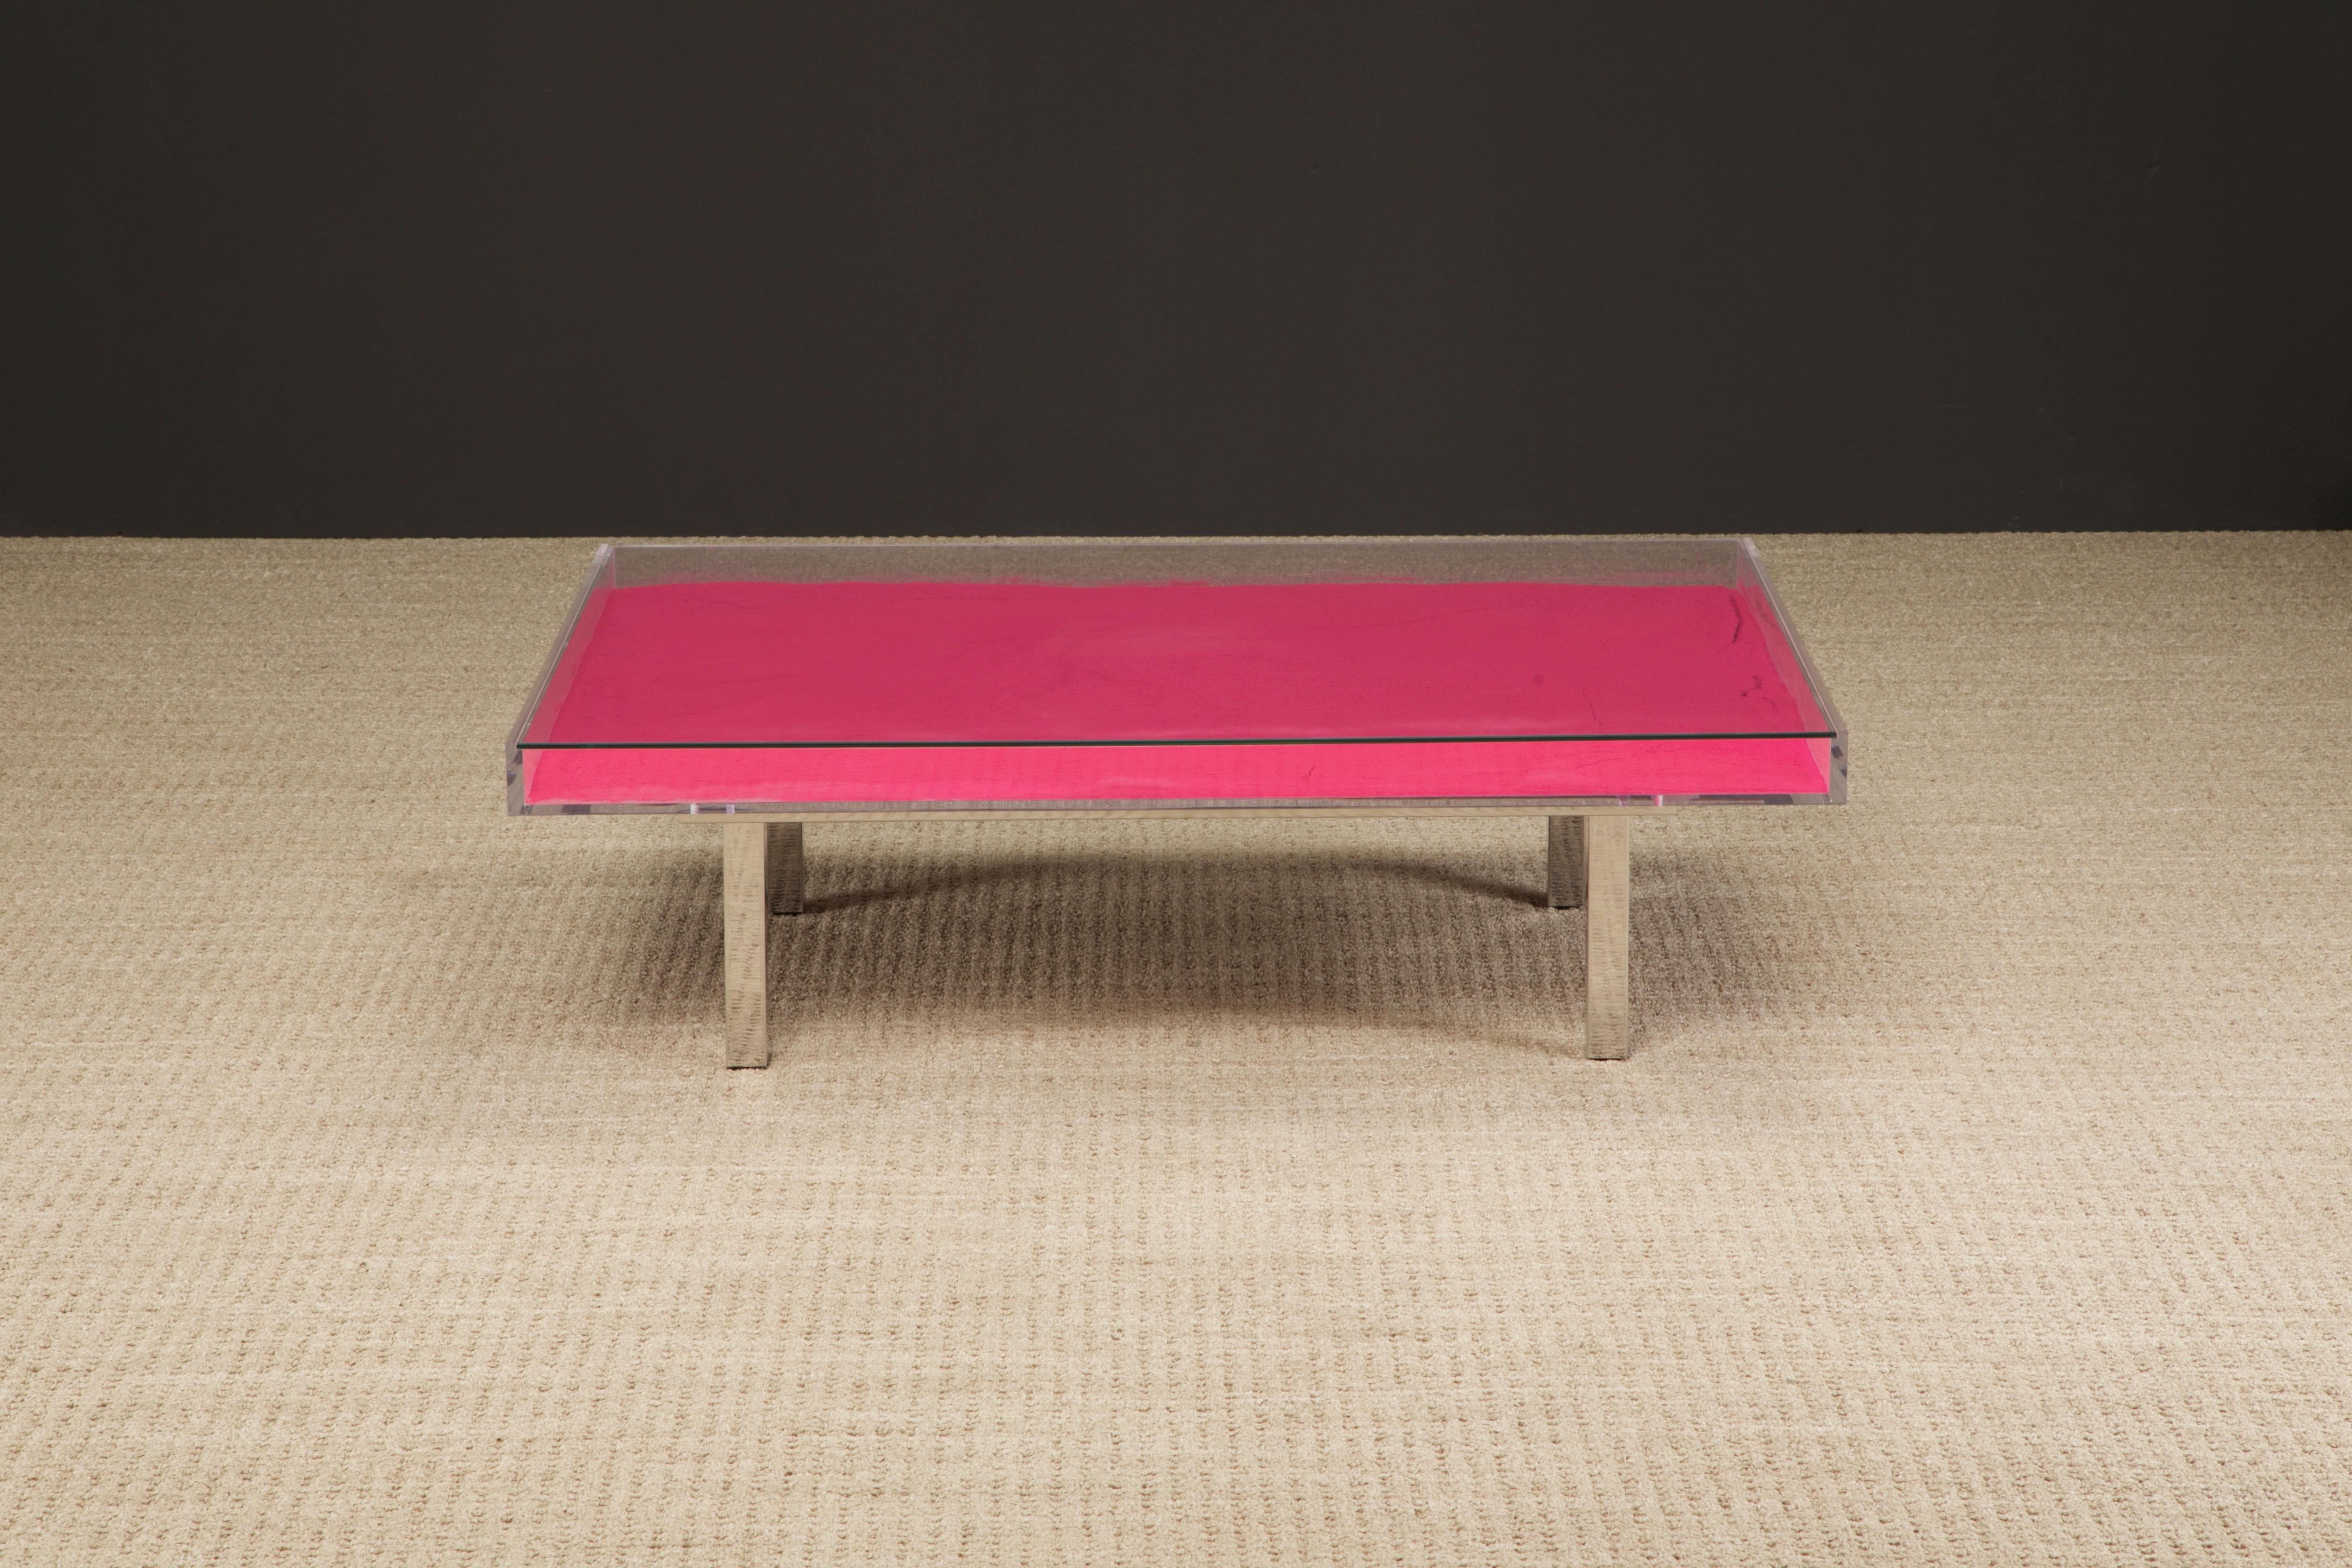 French Yves Klein 'Monopink' Rose Pigment Cocktail Table, 1961 / 1963 France, Signed 